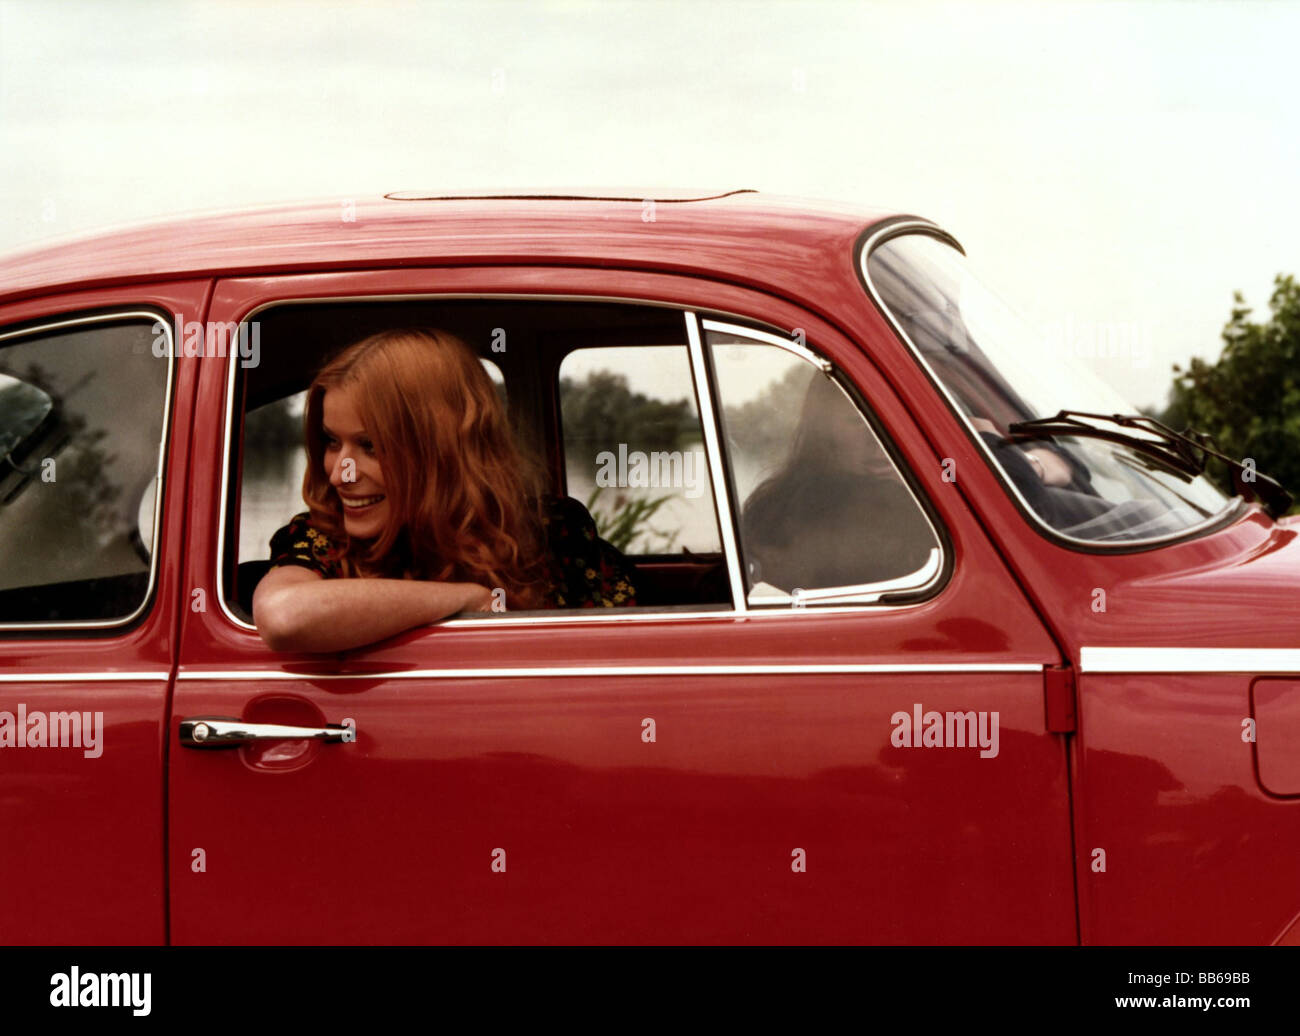 transport / transportation, cars, models, VW, beetle 1303, young woman, 1972, 1970s, 70s, Volkswagen, car, car typ, historic, historical, 20th century, people, women, female, Stock Photo